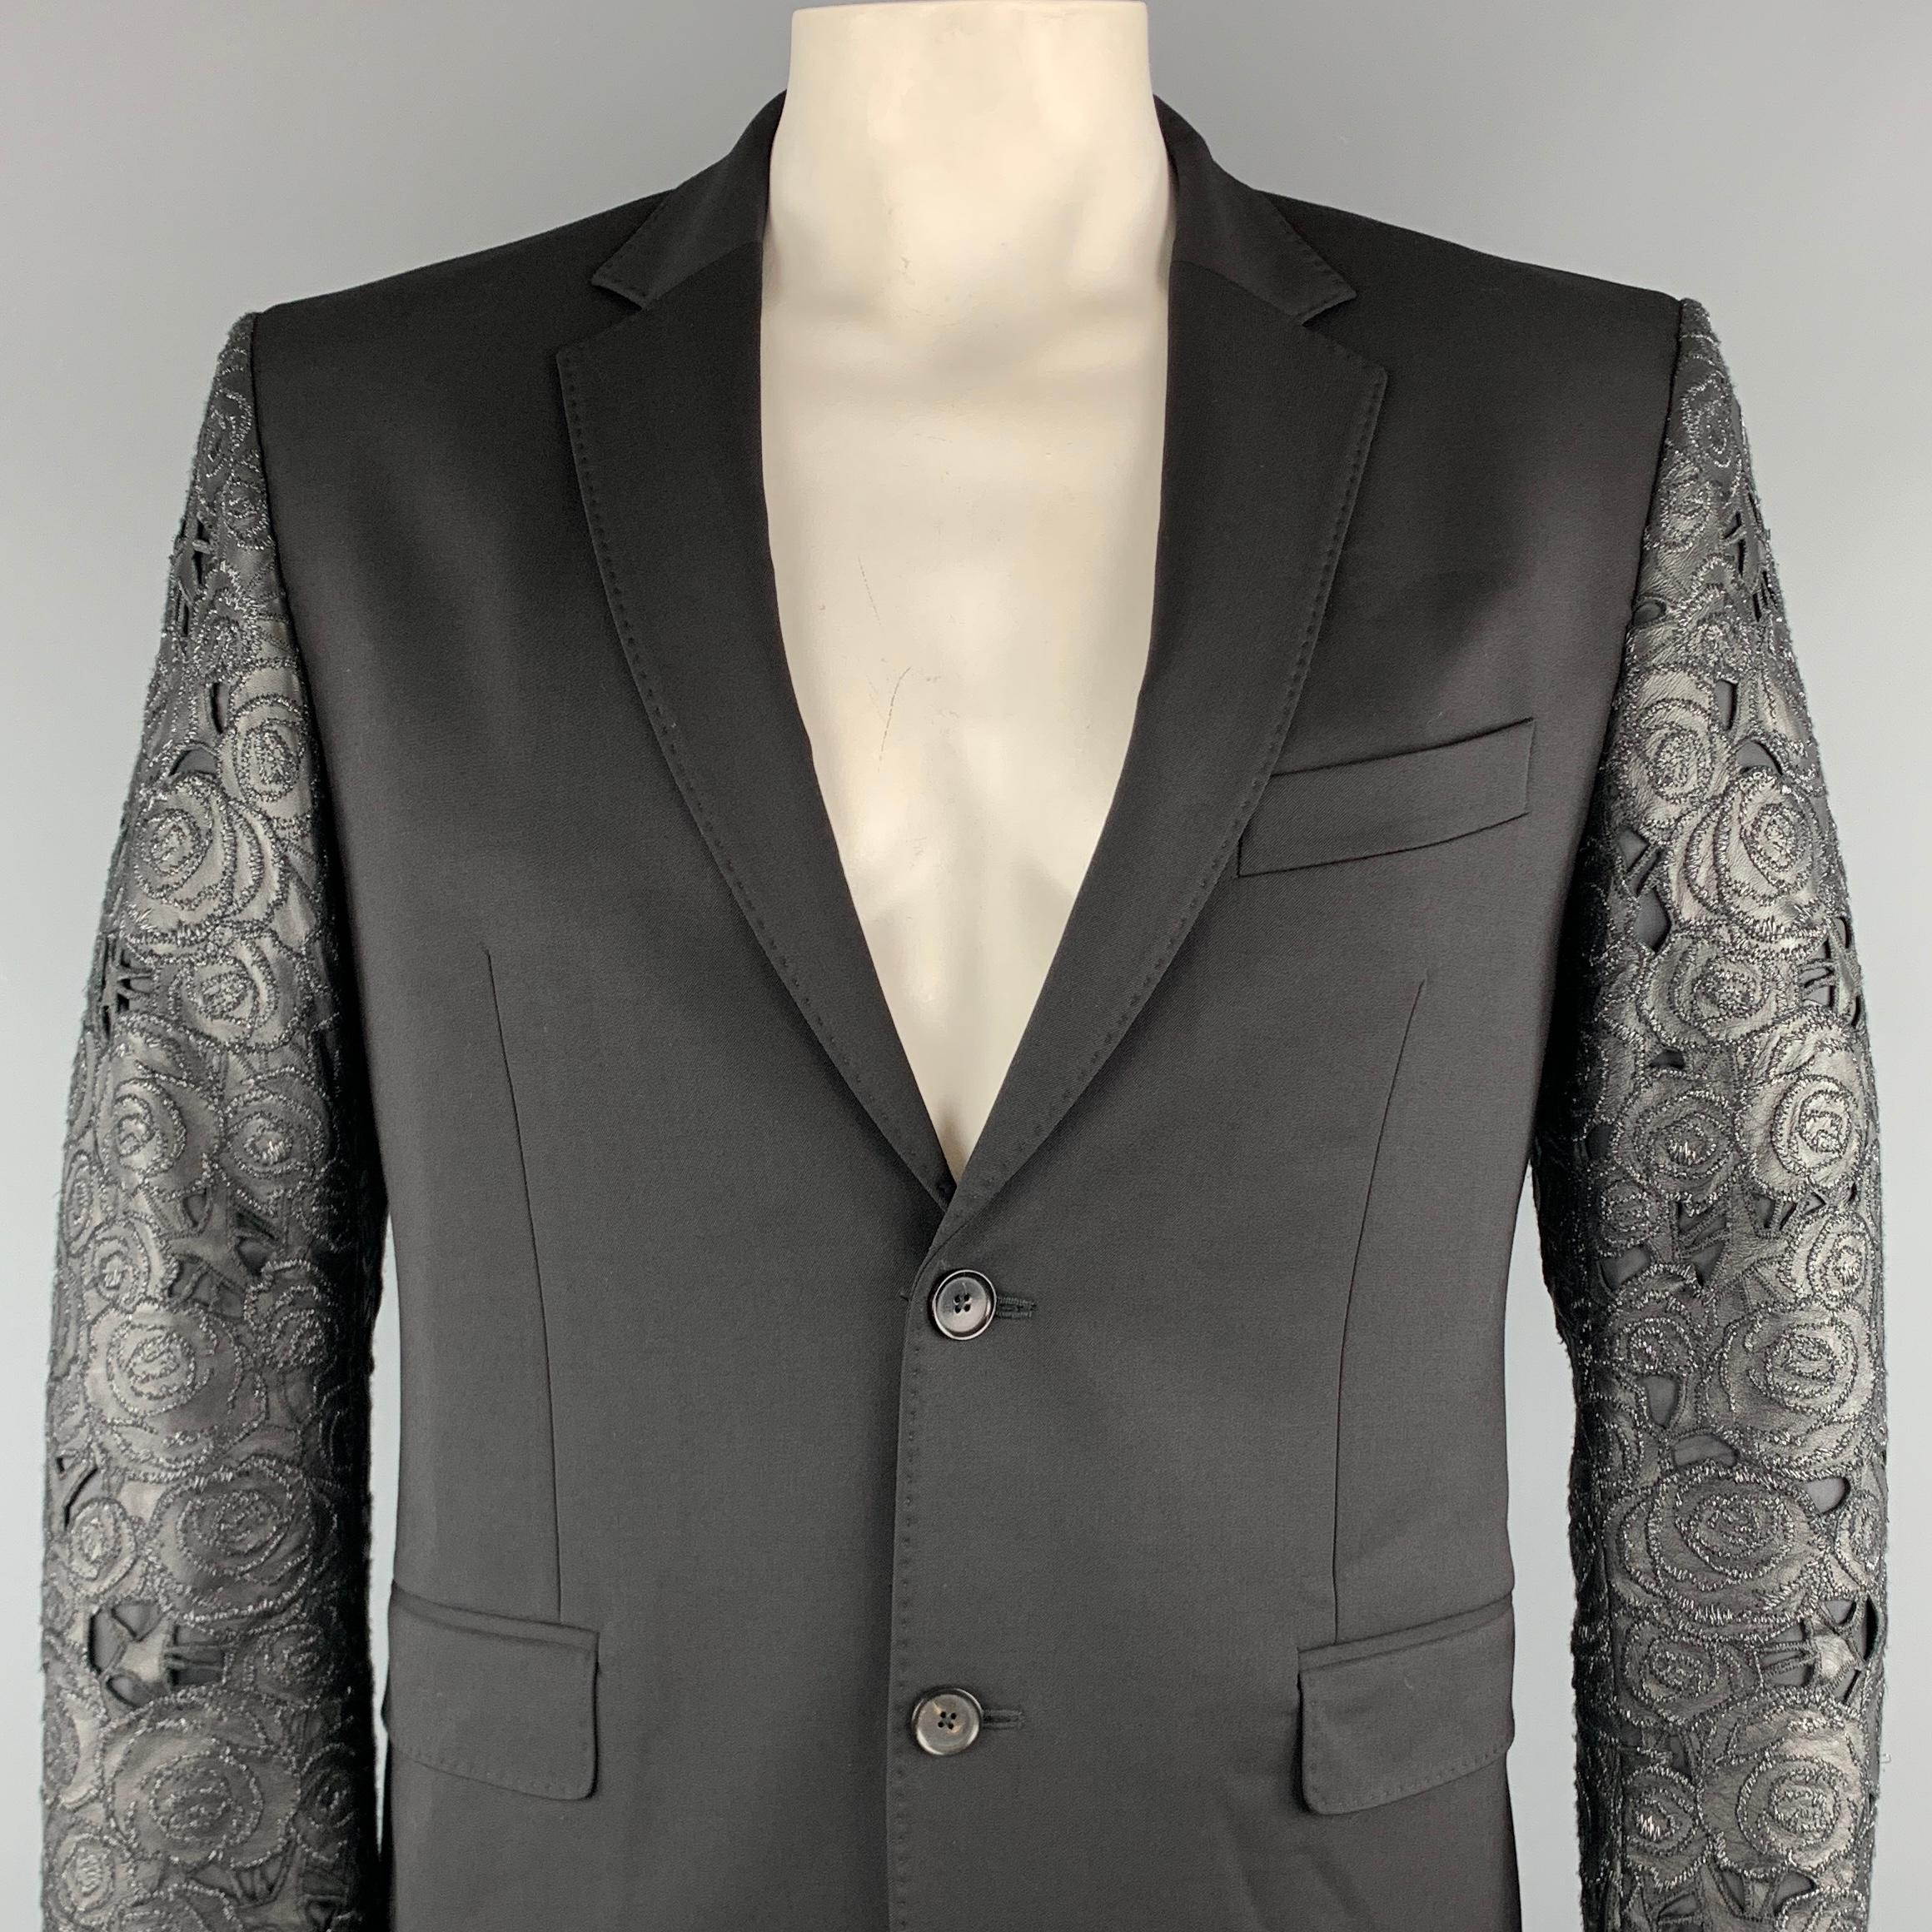 JOHN RICHMOND Sport Coat comes in a black mixed material featuring a notch lapel style, leather lace sleeves, and a two button closure. Made in Italy.

Excellent Pre-Owned Condition.
Marked: 52

Measurements:

Shoulder: 18 in.
Chest: 42 in. 
Sleeve: